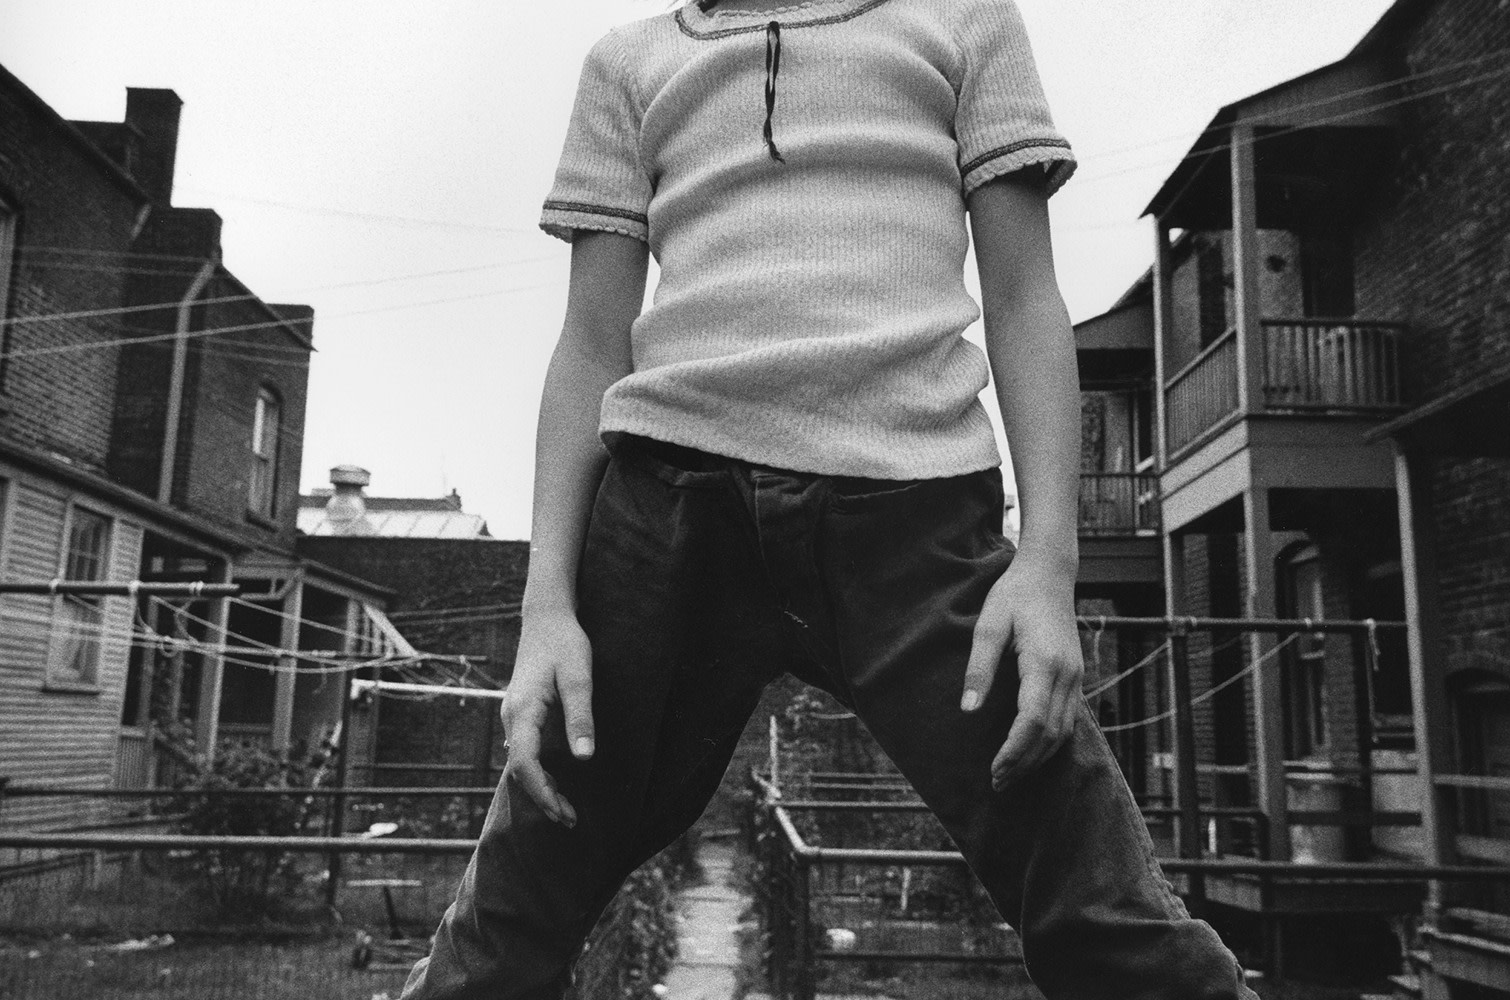 Defiant Girl up on Fence, October 1973, 16 x 20 inches